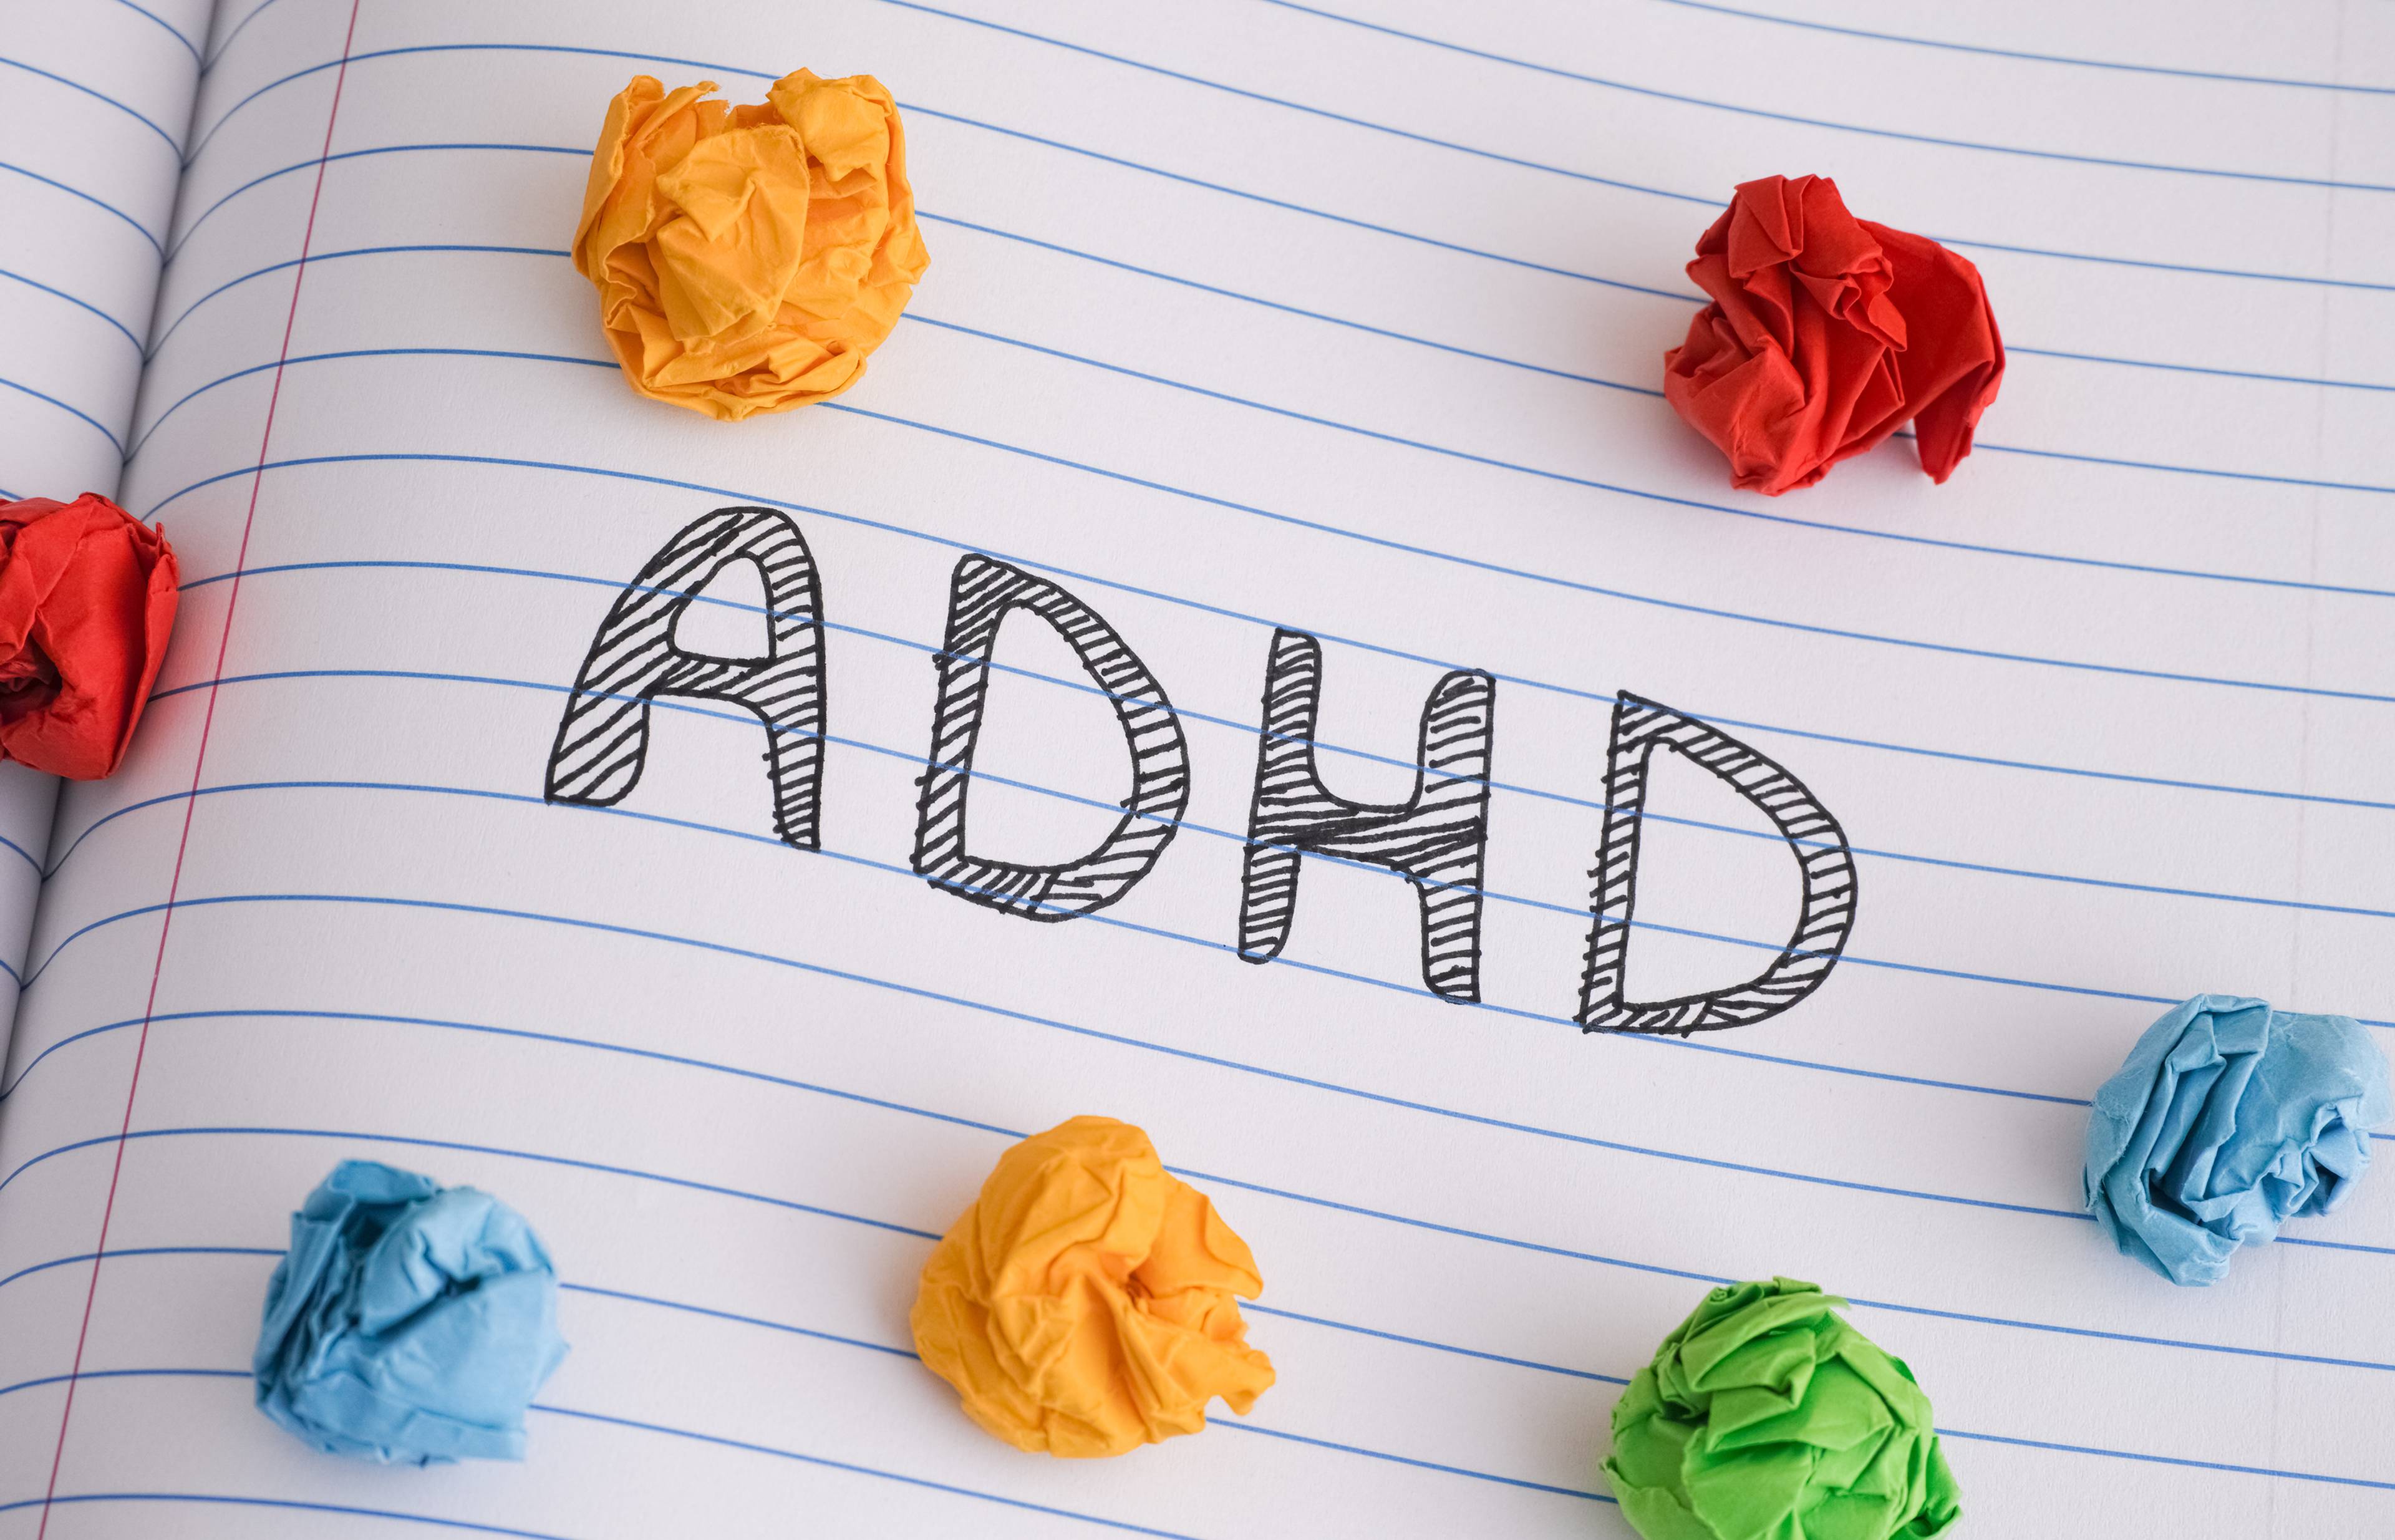 ADHD Conference: Optimal Support at School, College and Home for Children and Young People with ADHD